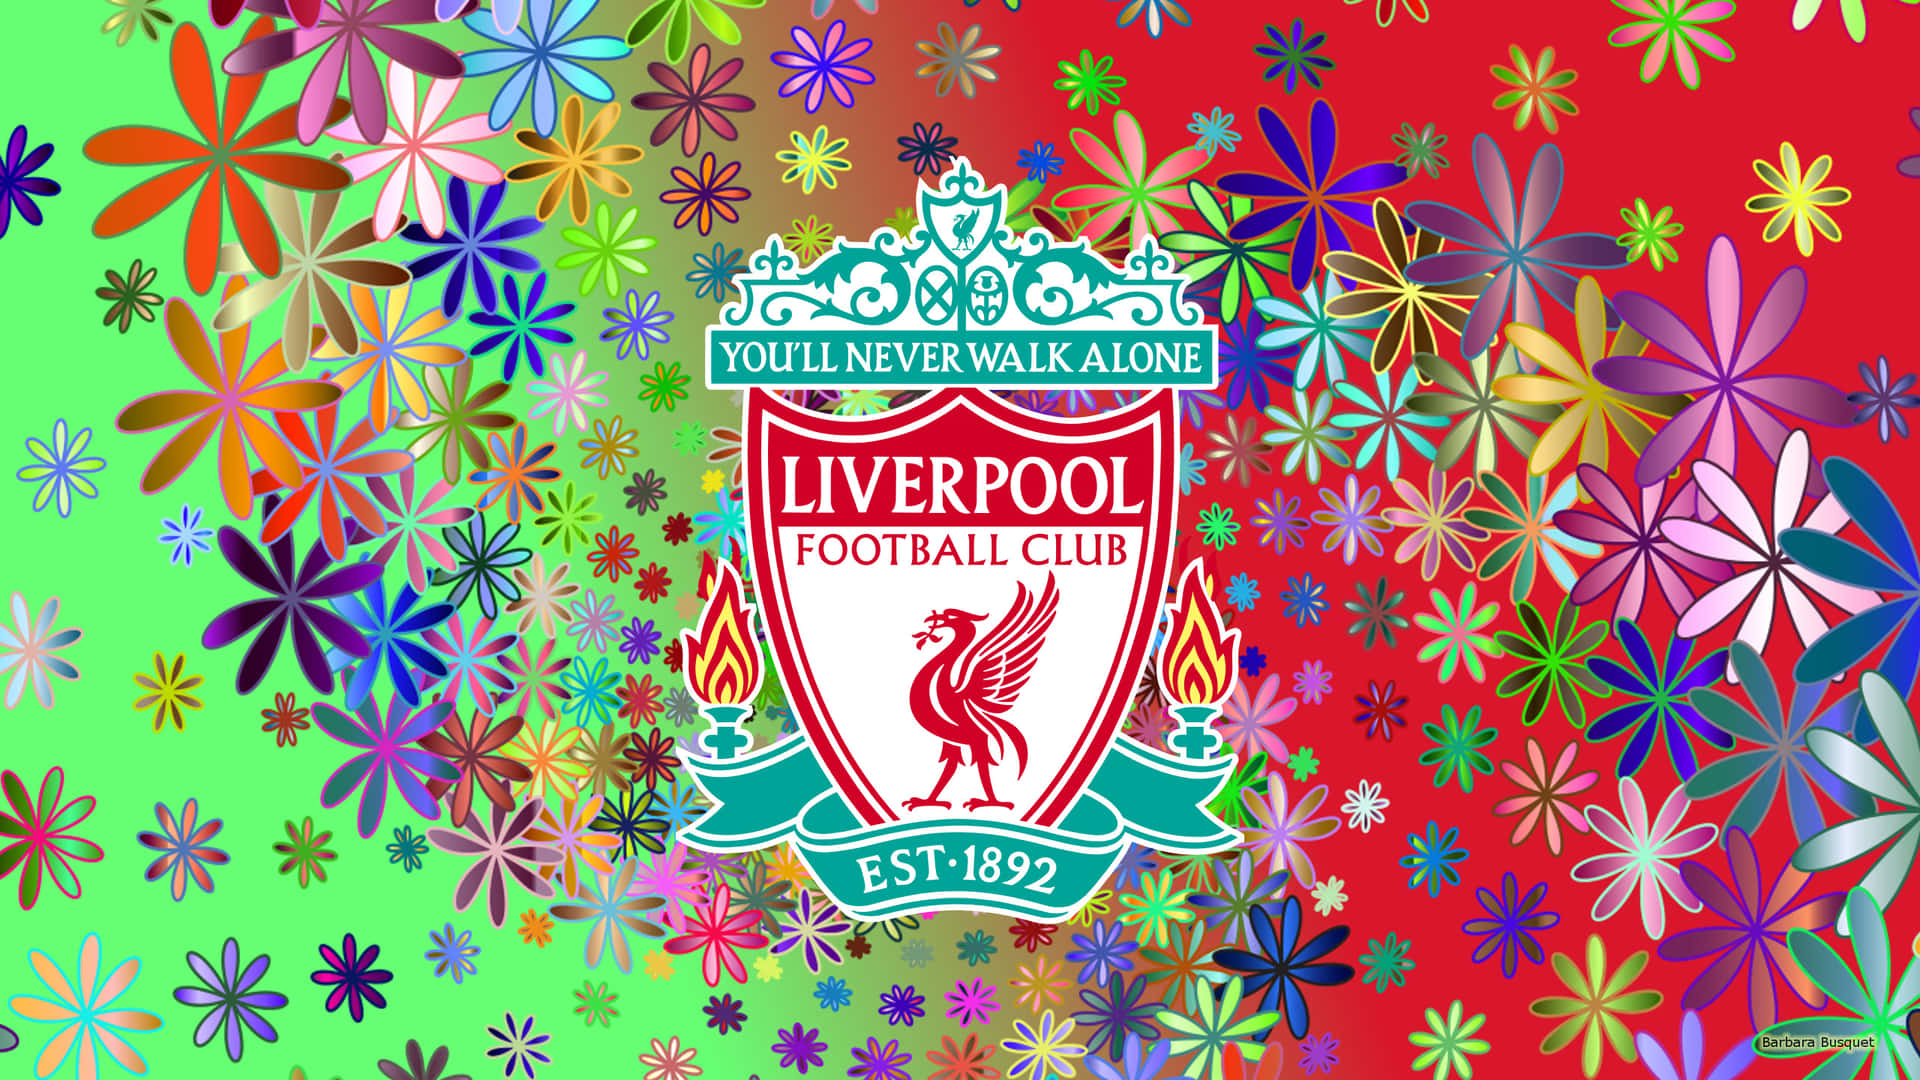 Join the Anfield Crowd and Support Liverpool FC from your Desktop Wallpaper